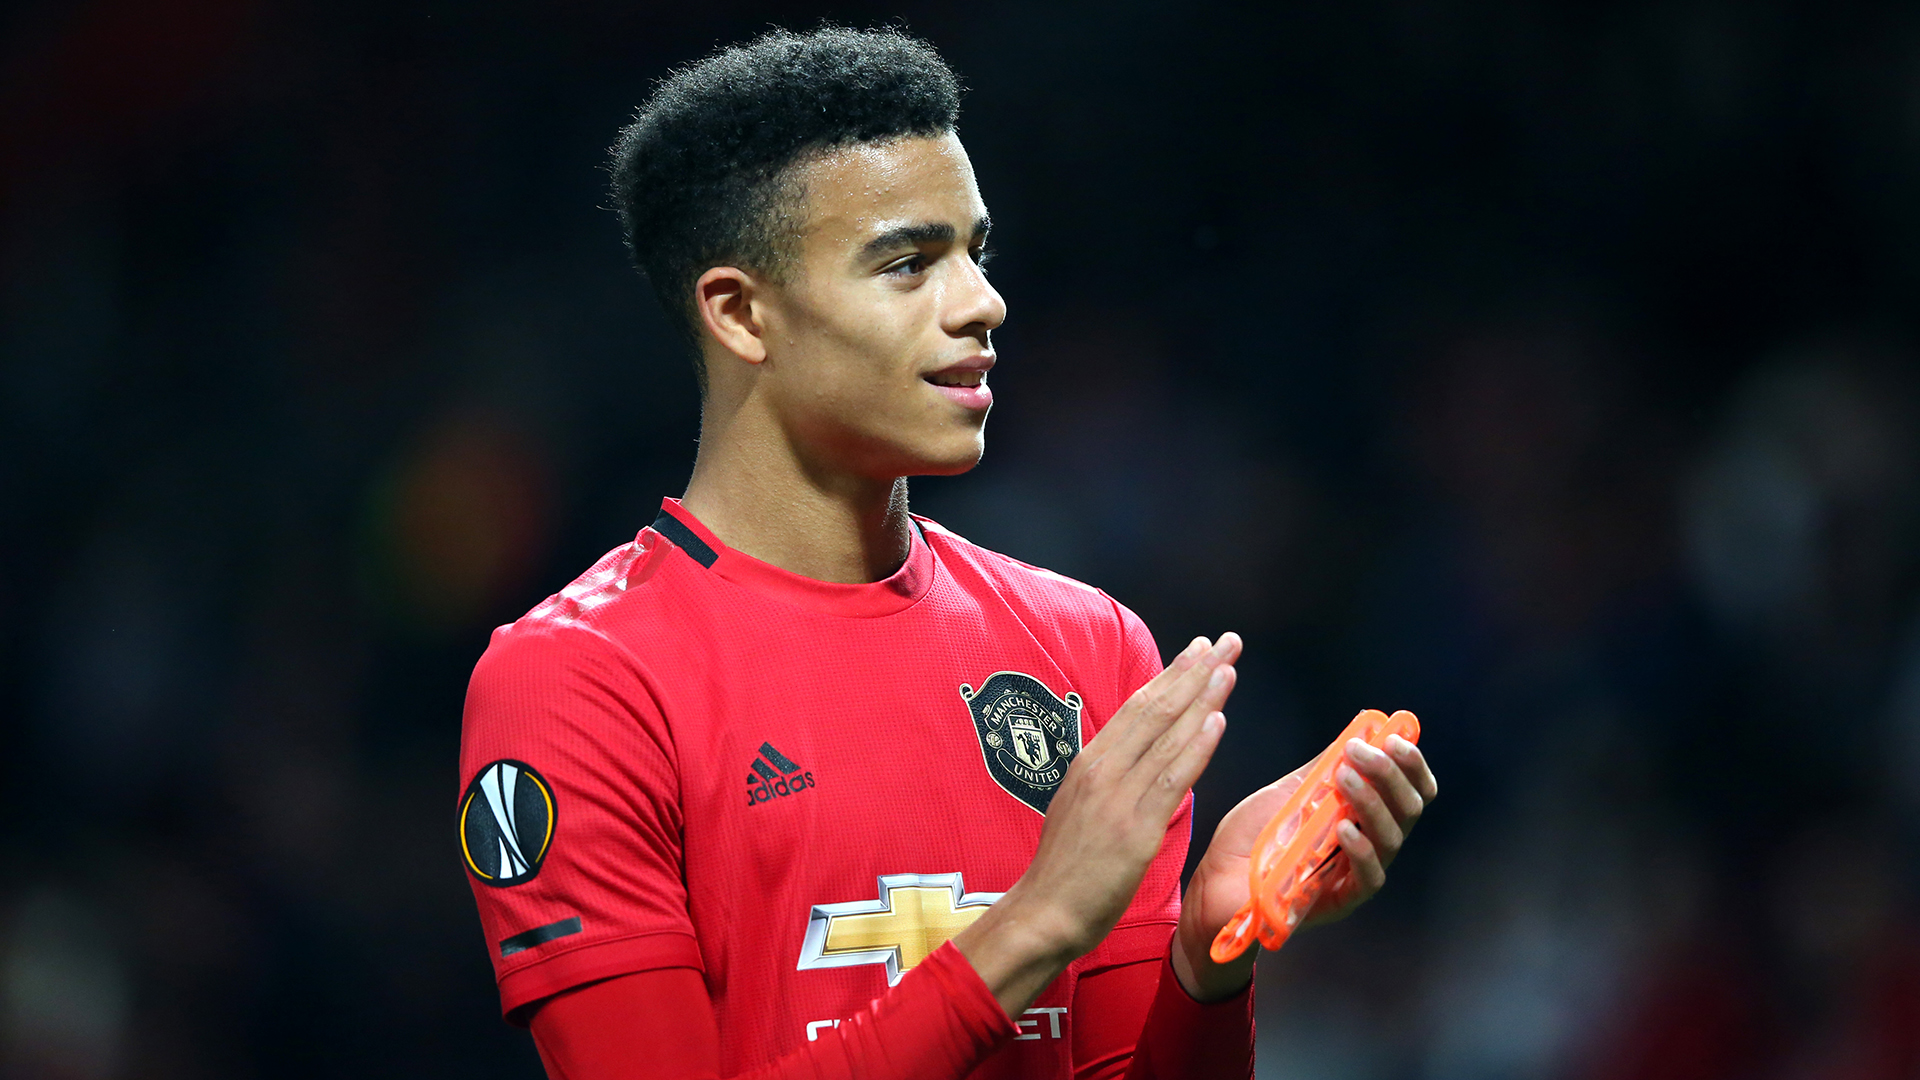 Manchester United news: The making of Man Utd's Mason Greenwood -  Discovered by accident before scoring 16 on debut | Goal.com